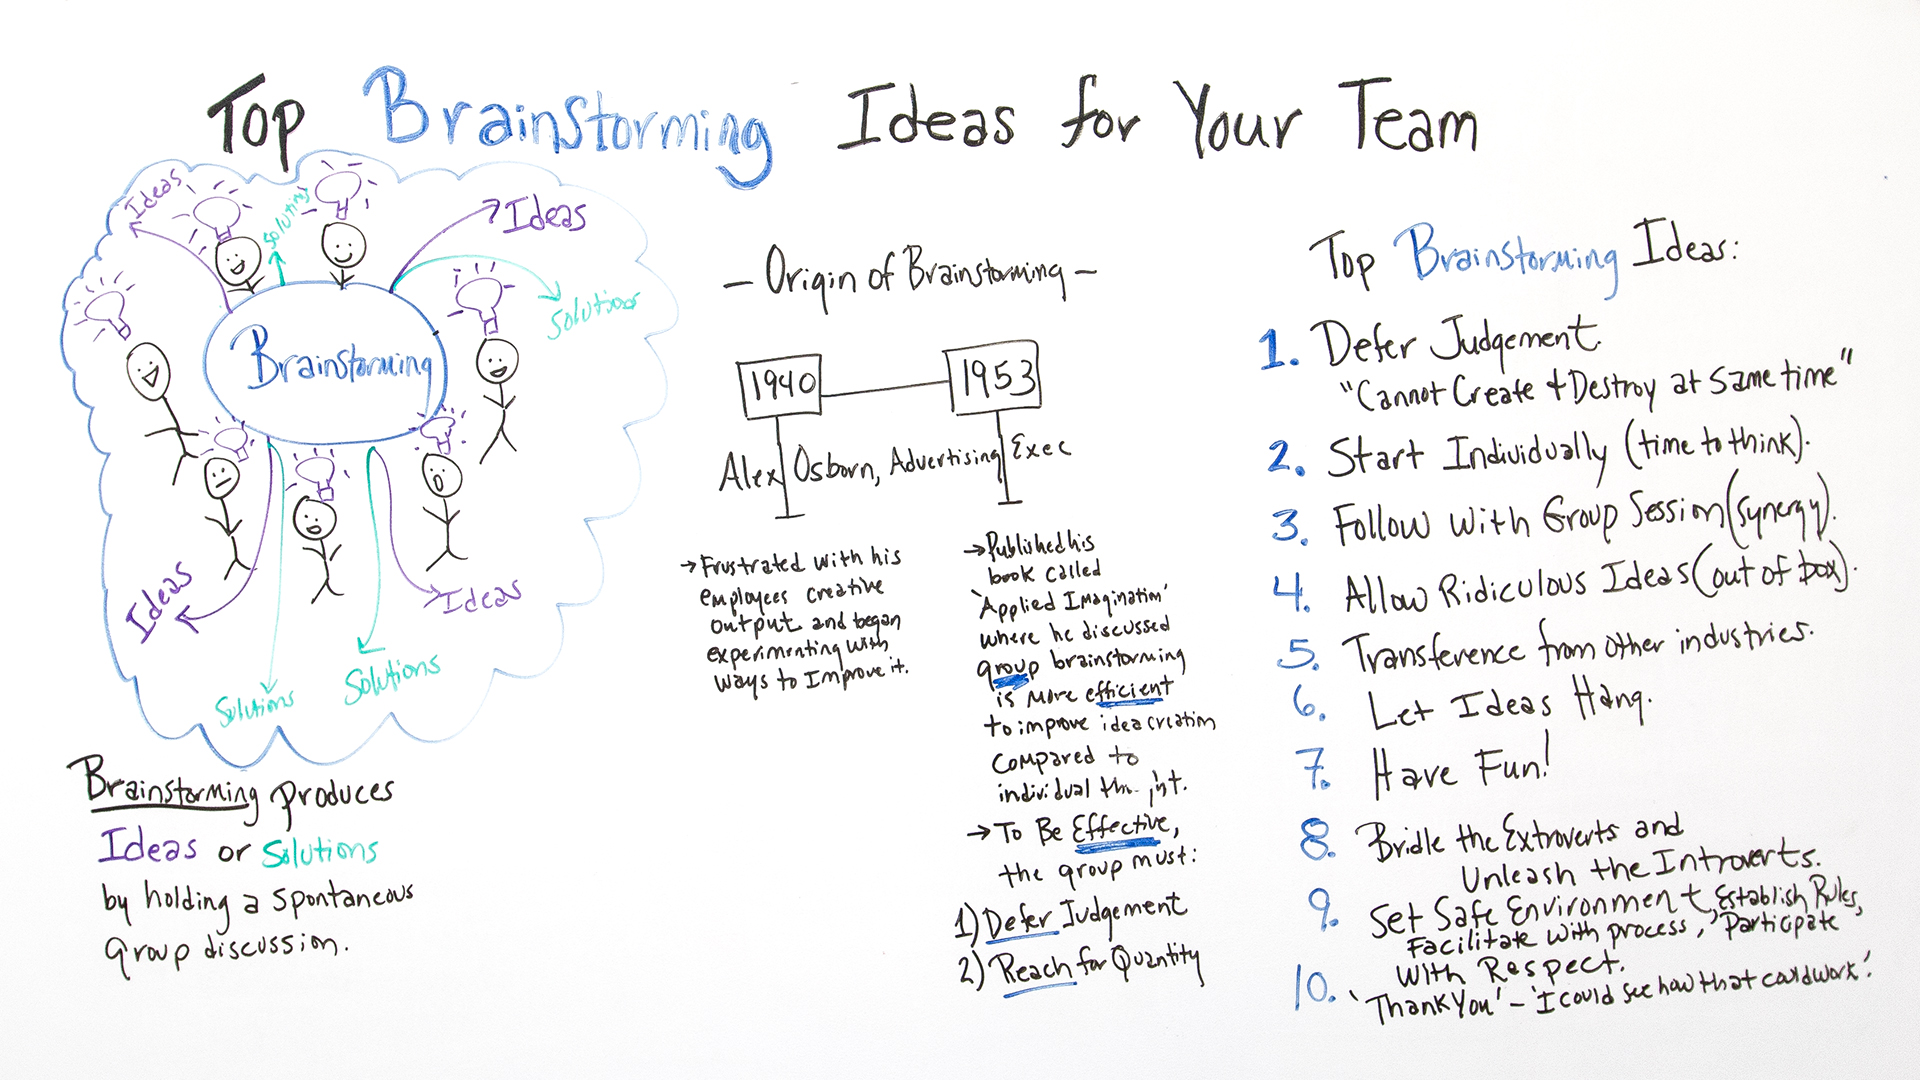 Top-Brainstorming-Ideas-for-Your-Team-Board - Colorado Rapids Youth